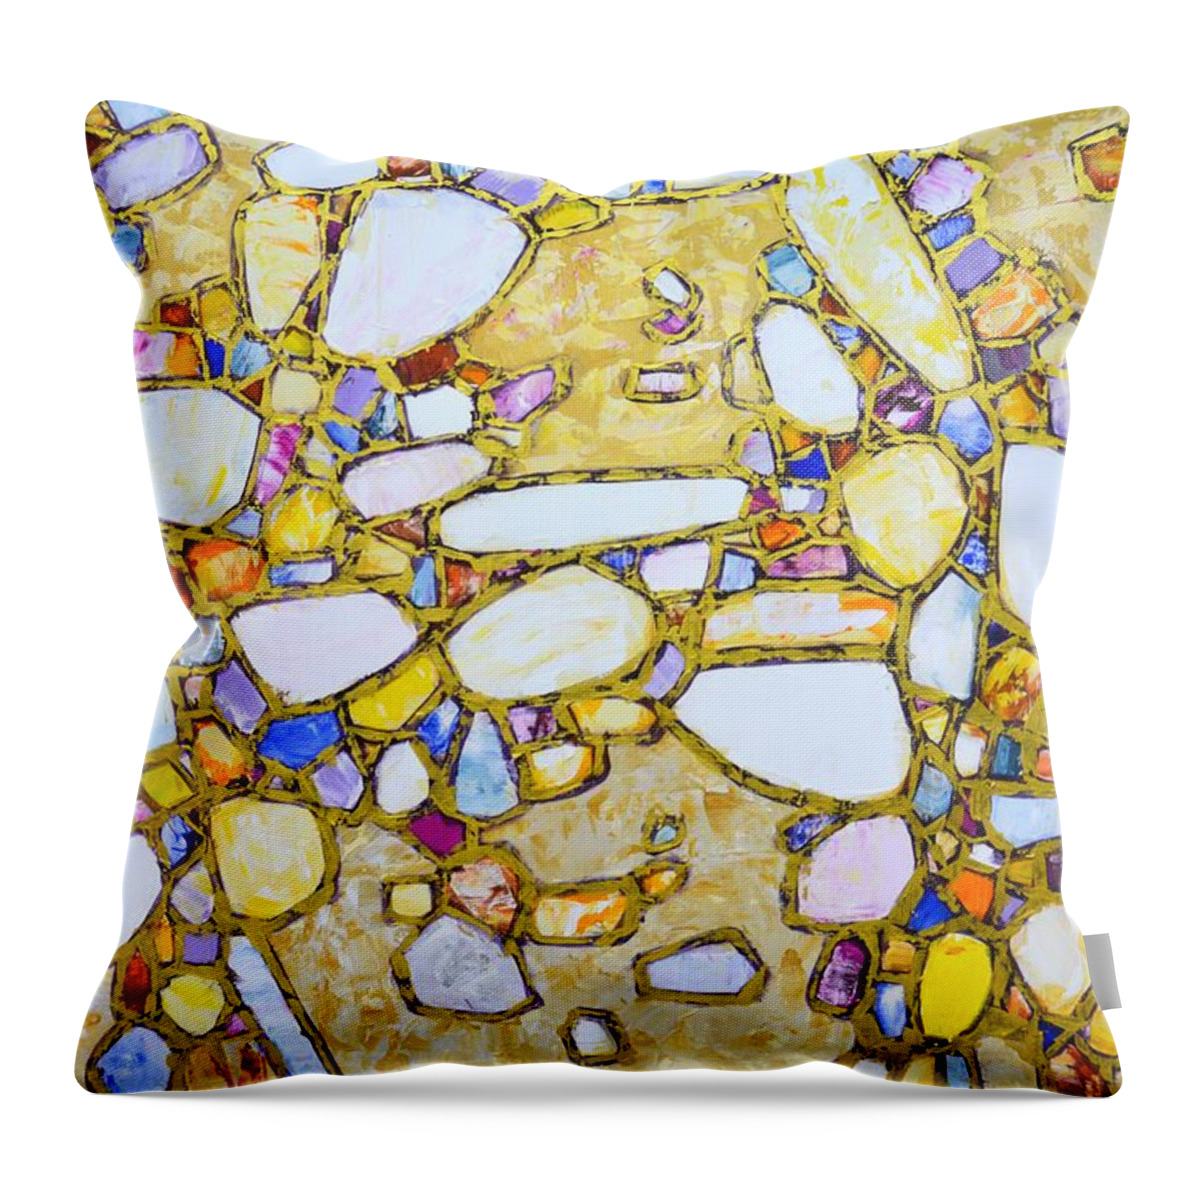 Stones Throw Pillow featuring the painting Gold around 2. by Irina Mask